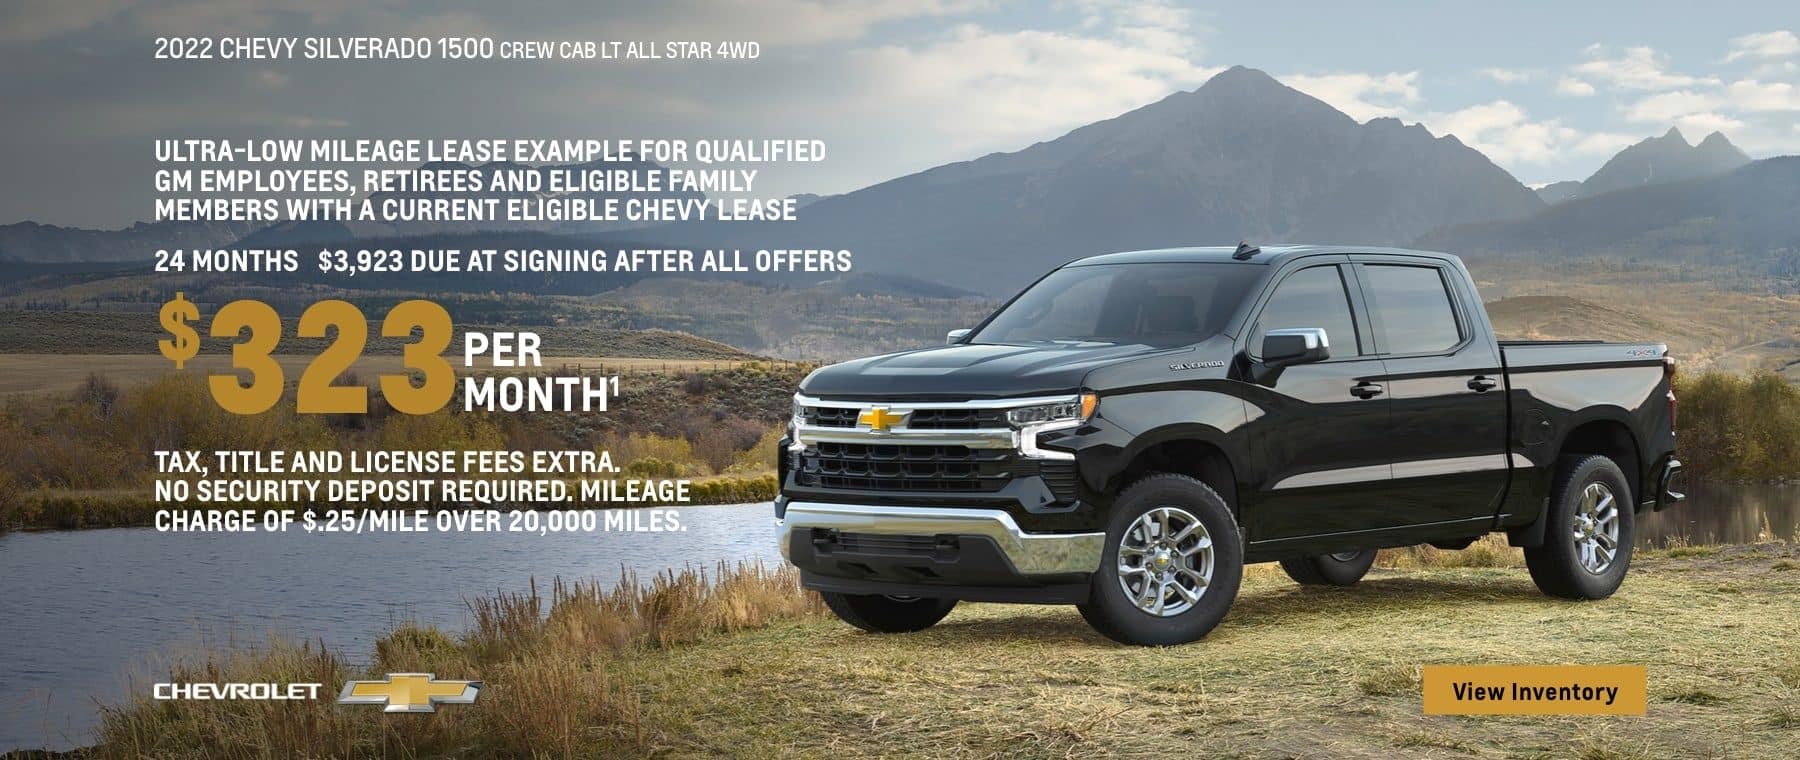 2022 Chevy Silverado 1500 Crew Cab LT All Star 4WD. Make your story a strong one. Ultra-low mileage lease example for qualified GM employees, retirees and eligible family members with a current eligible Chevy lease. $323 per month. 24 months. $3,923 due at signing after all offers. Tax, title and license fees extra. No security deposit required. Mileage charge of $0.25/mile over 20,000 miles.